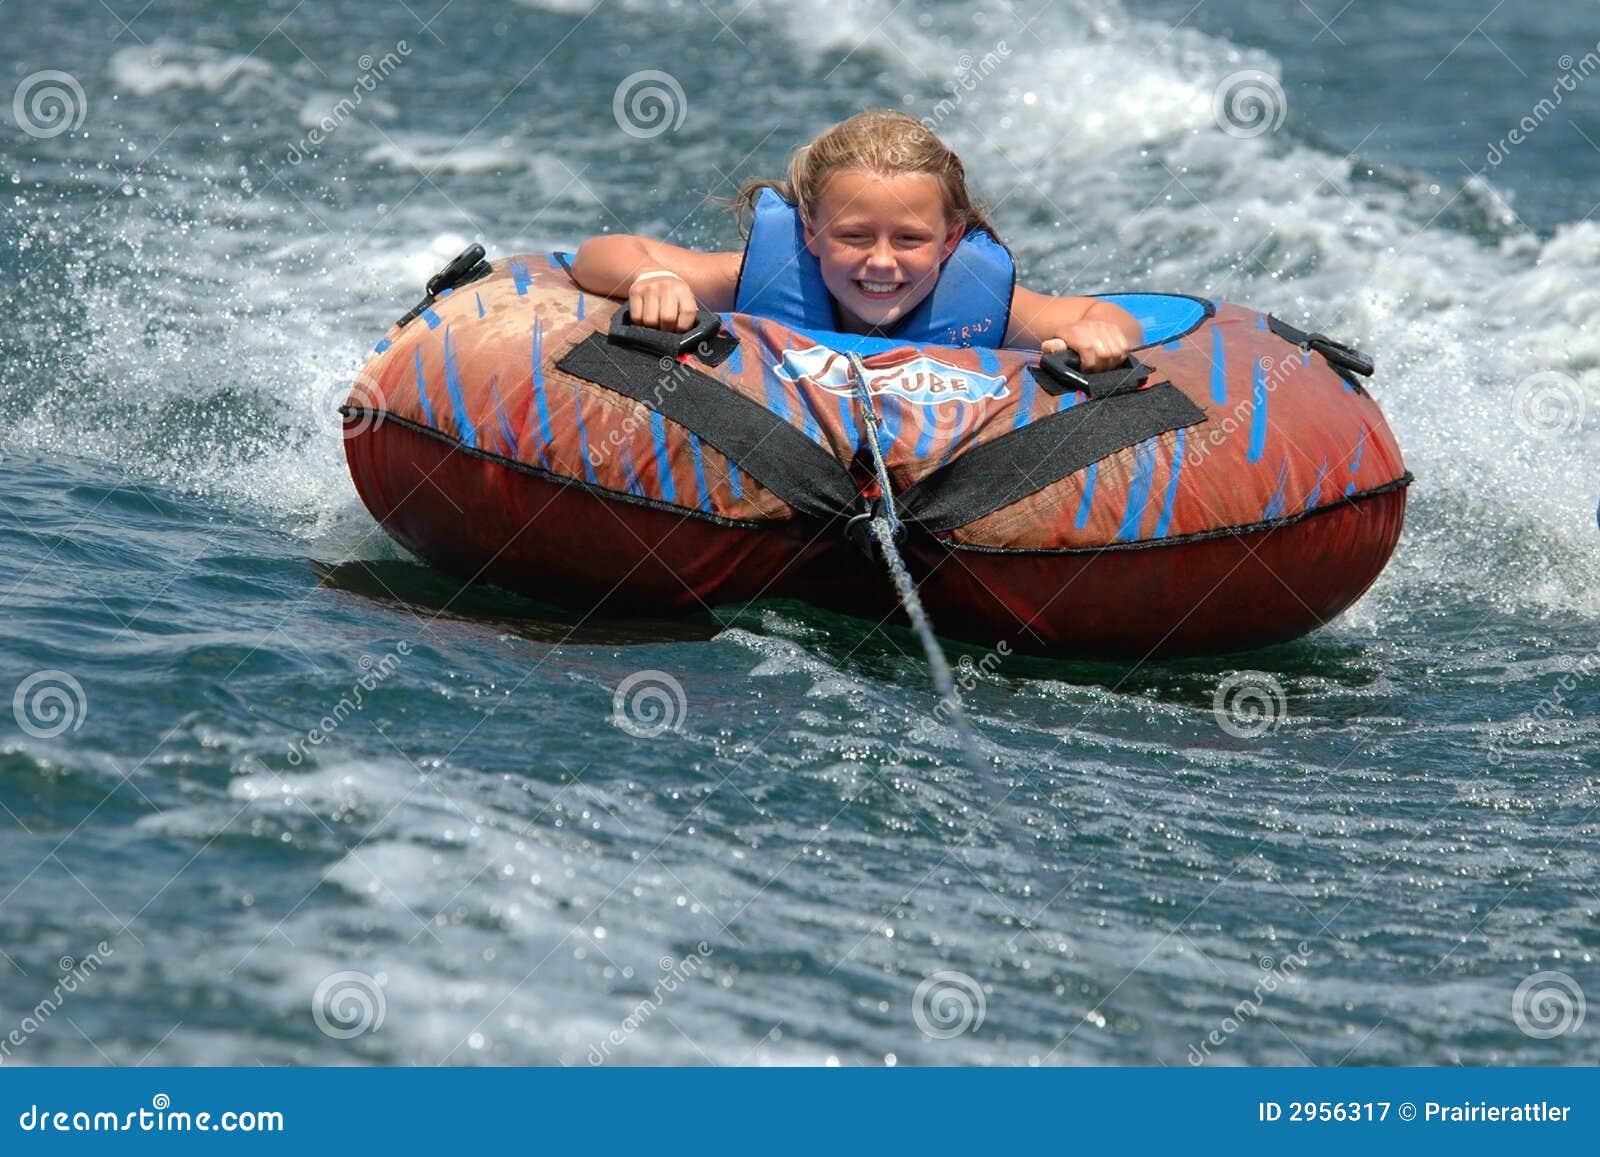 girl water tubing with a smile